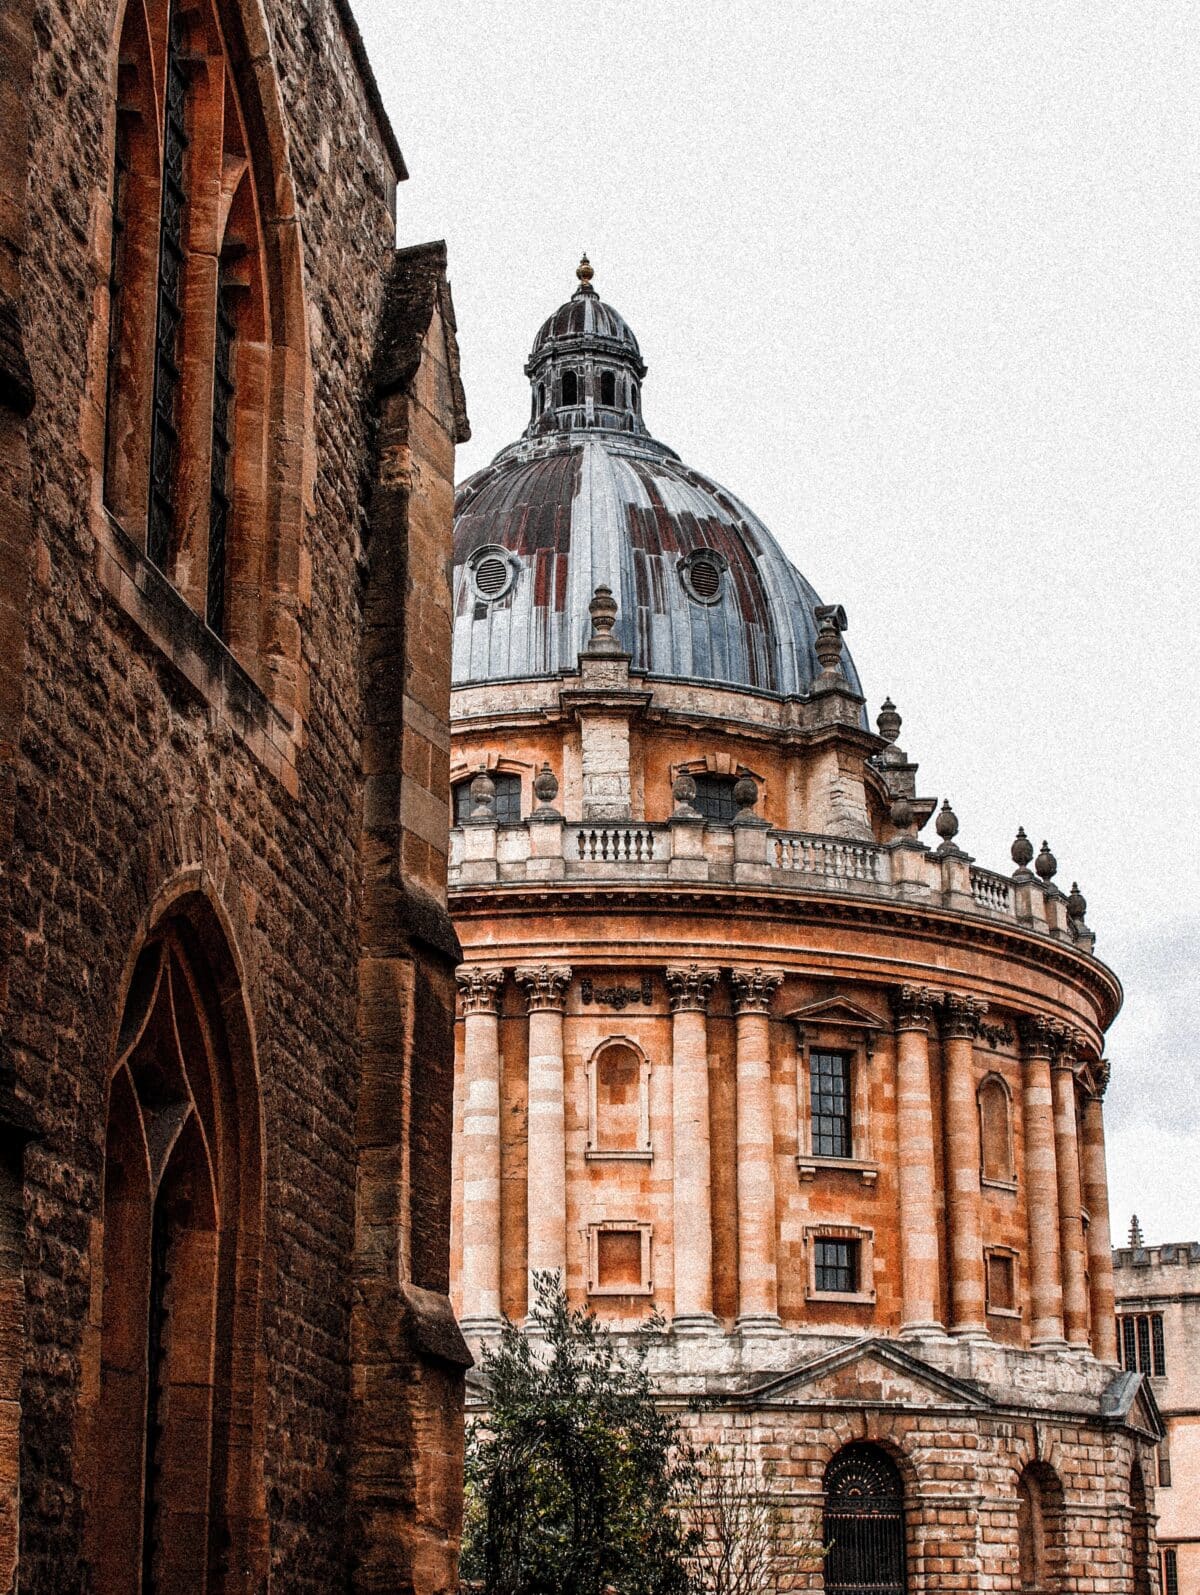 Radcliffe Camera in central Oxford